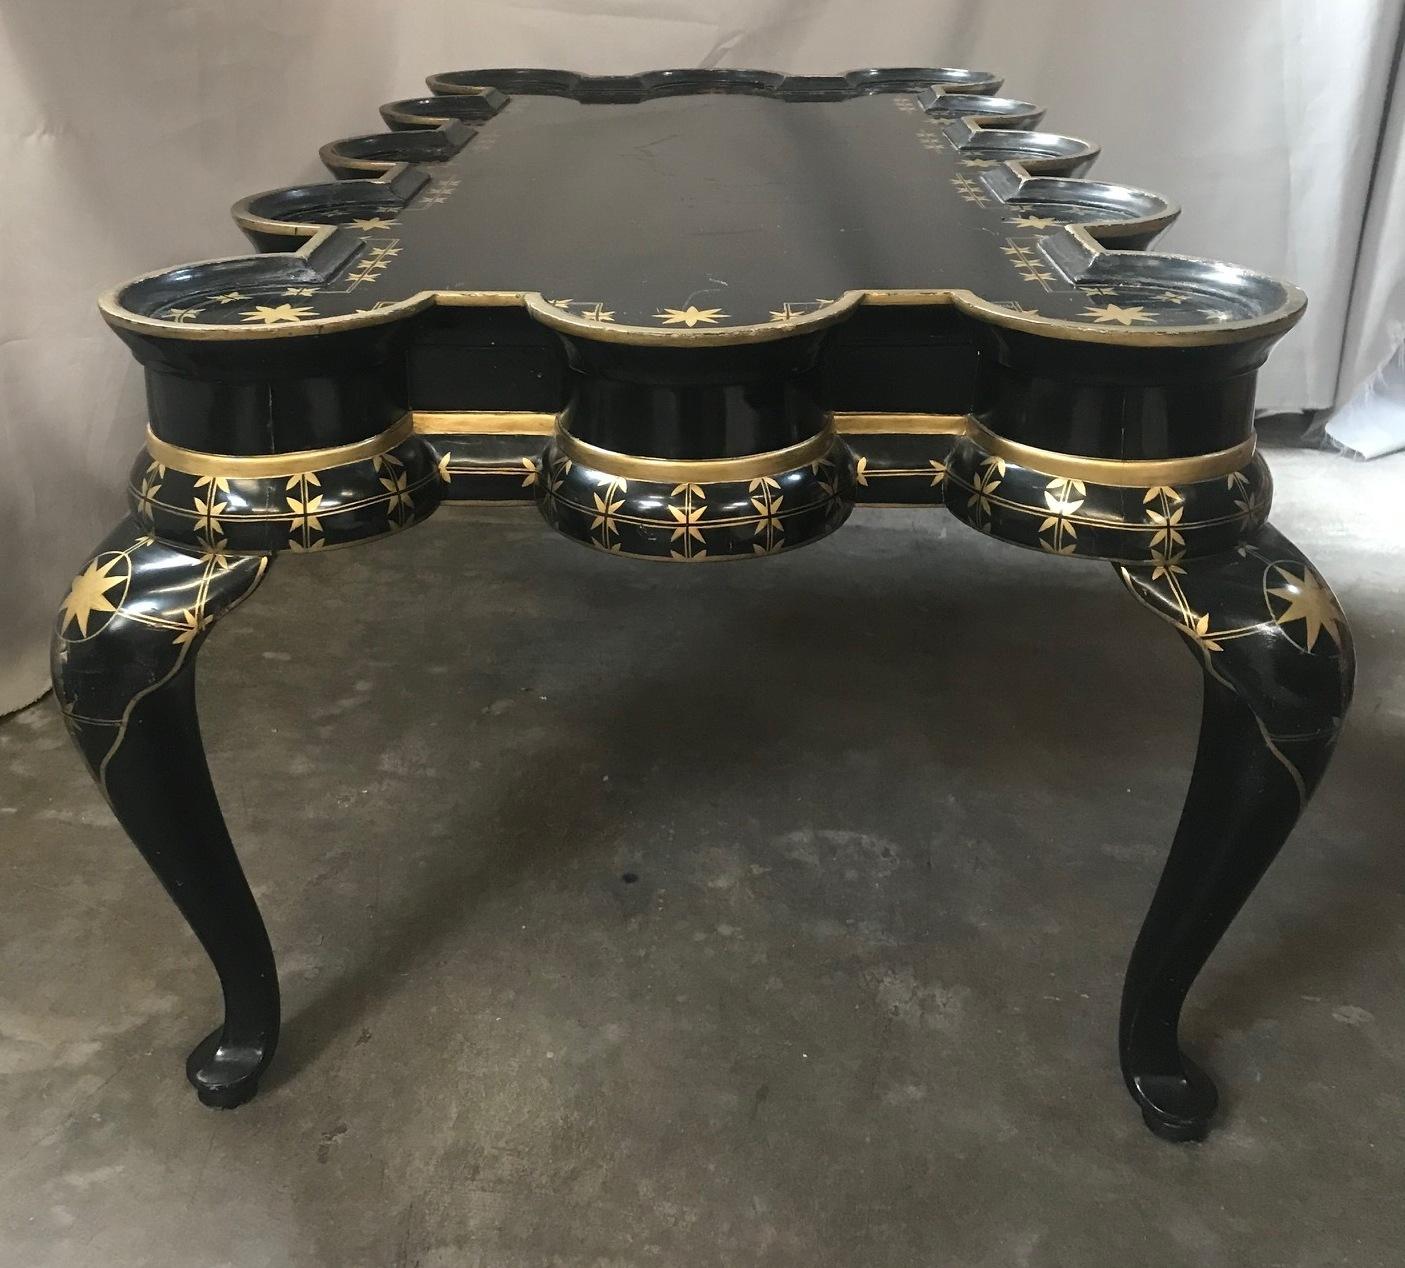 Hand-Painted Gold Decorated Black Lacquer Coffee Table